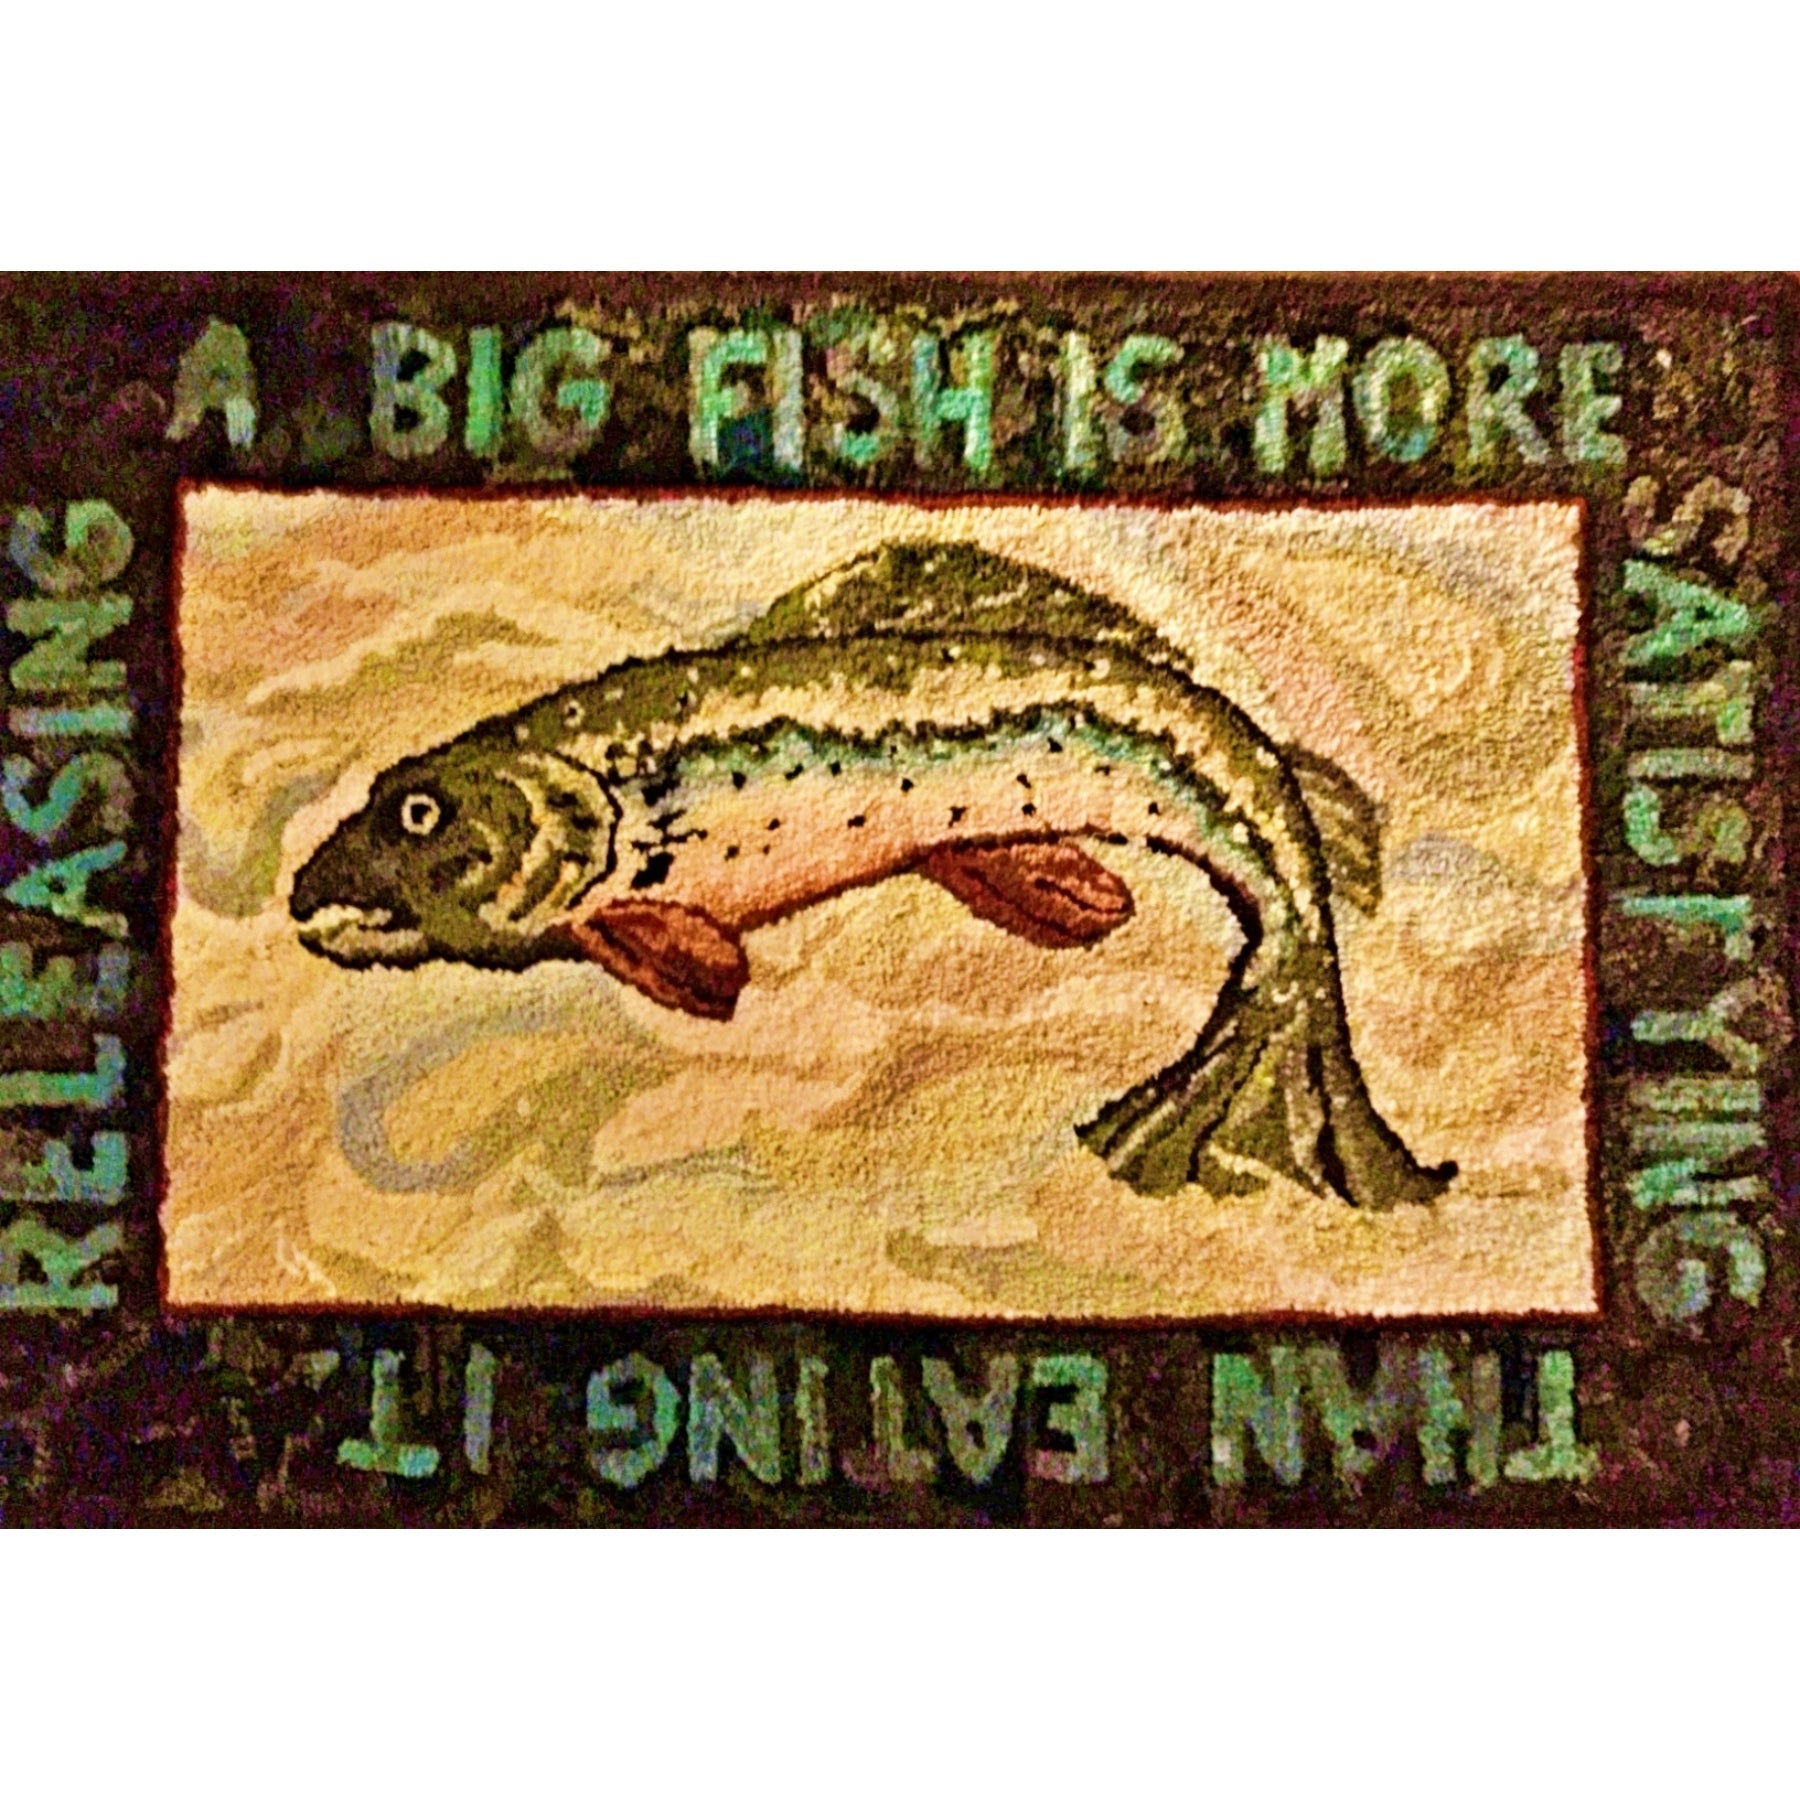 Big Fish, rug hooked by Janice McLaughlin